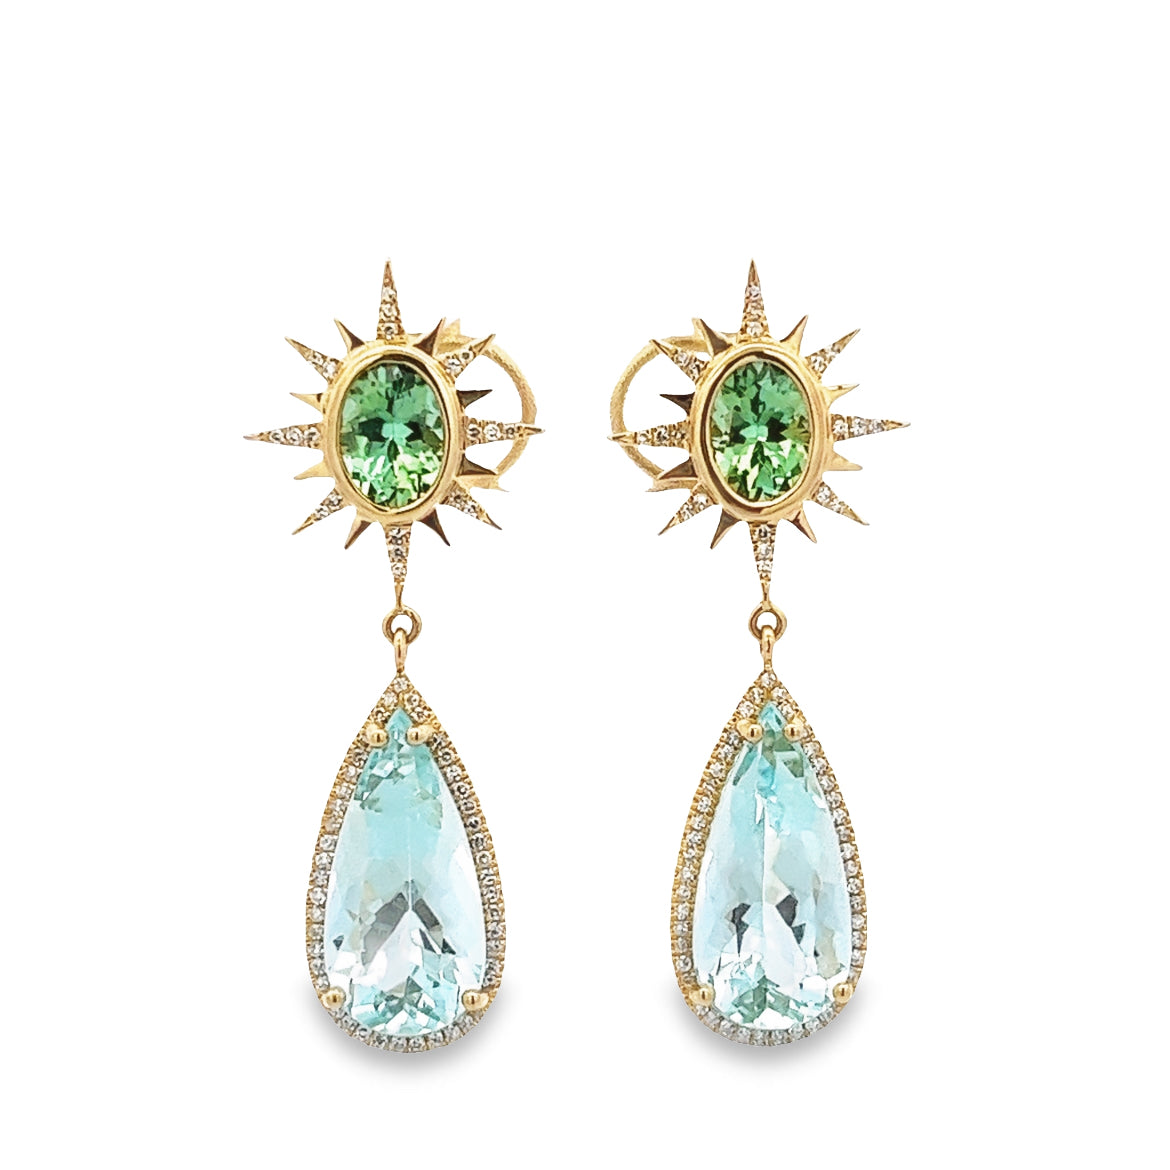 14K GOLD LONG EARRINGS WITH TOURMALINE AND AQUAMARINE